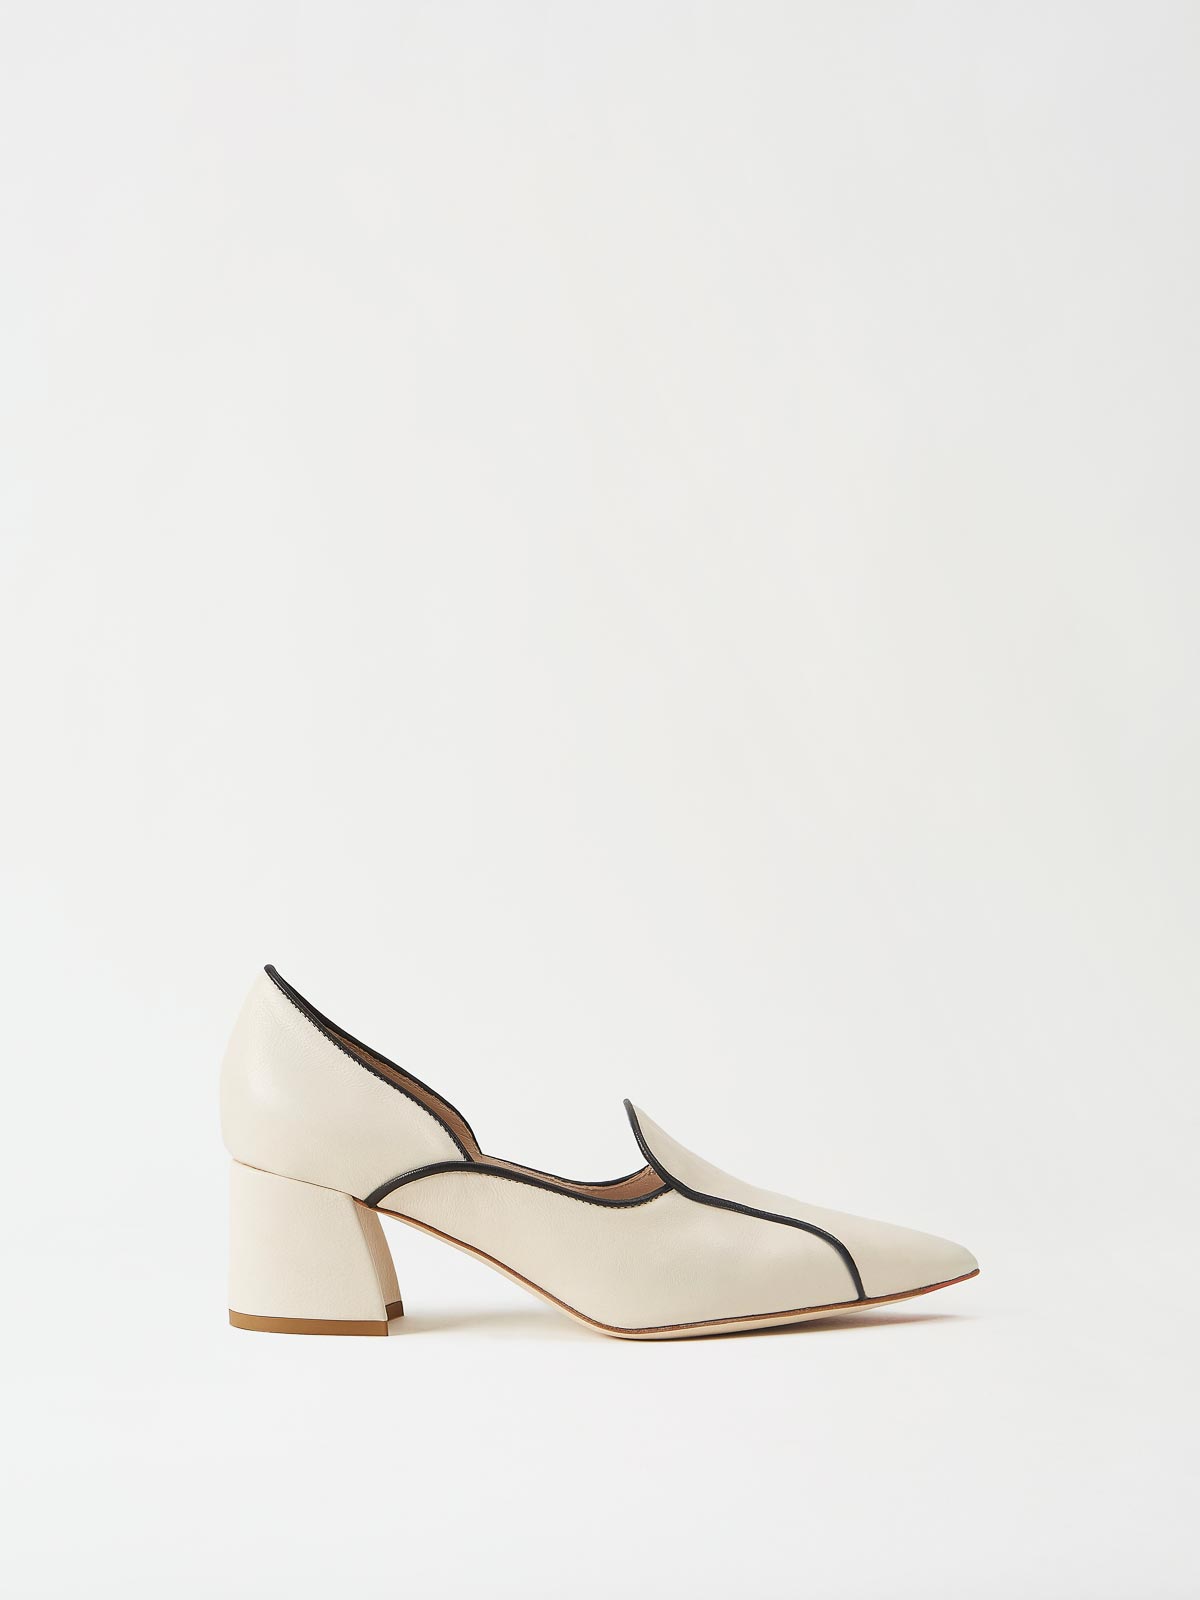 Mavette Fiona Loafer Ivory Side View